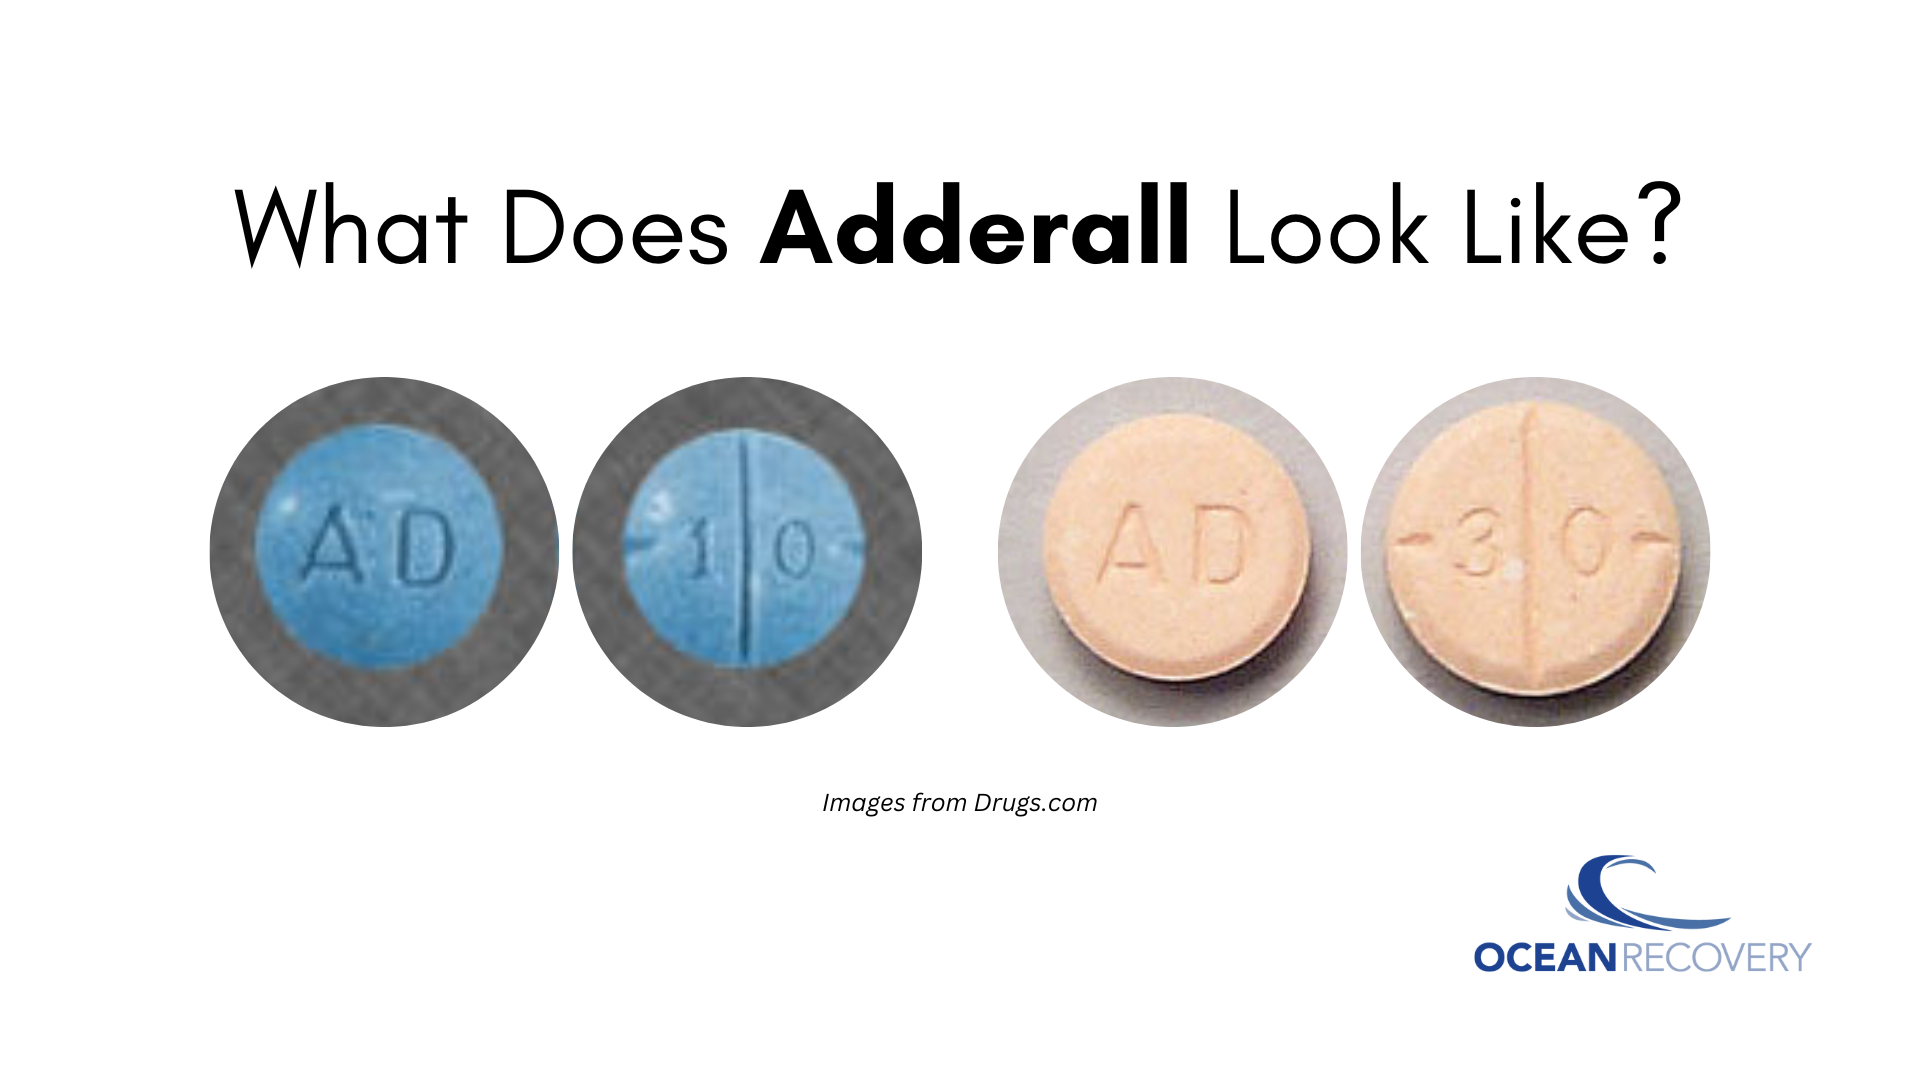 Modafinil Vs Adderall: Which Is Better For Adhd Treatment?